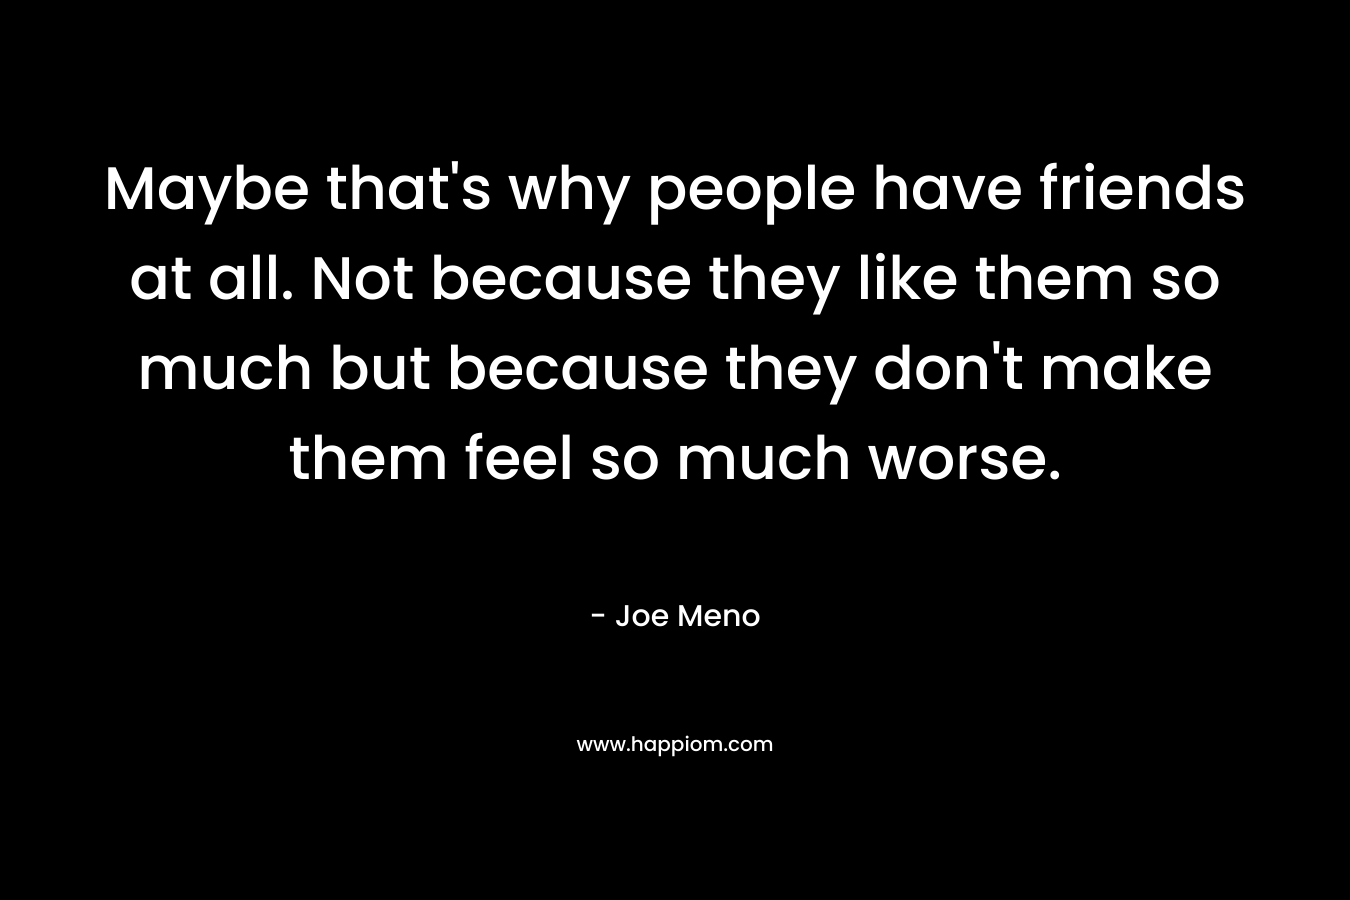 Maybe that’s why people have friends at all. Not because they like them so much but because they don’t make them feel so much worse. – Joe Meno